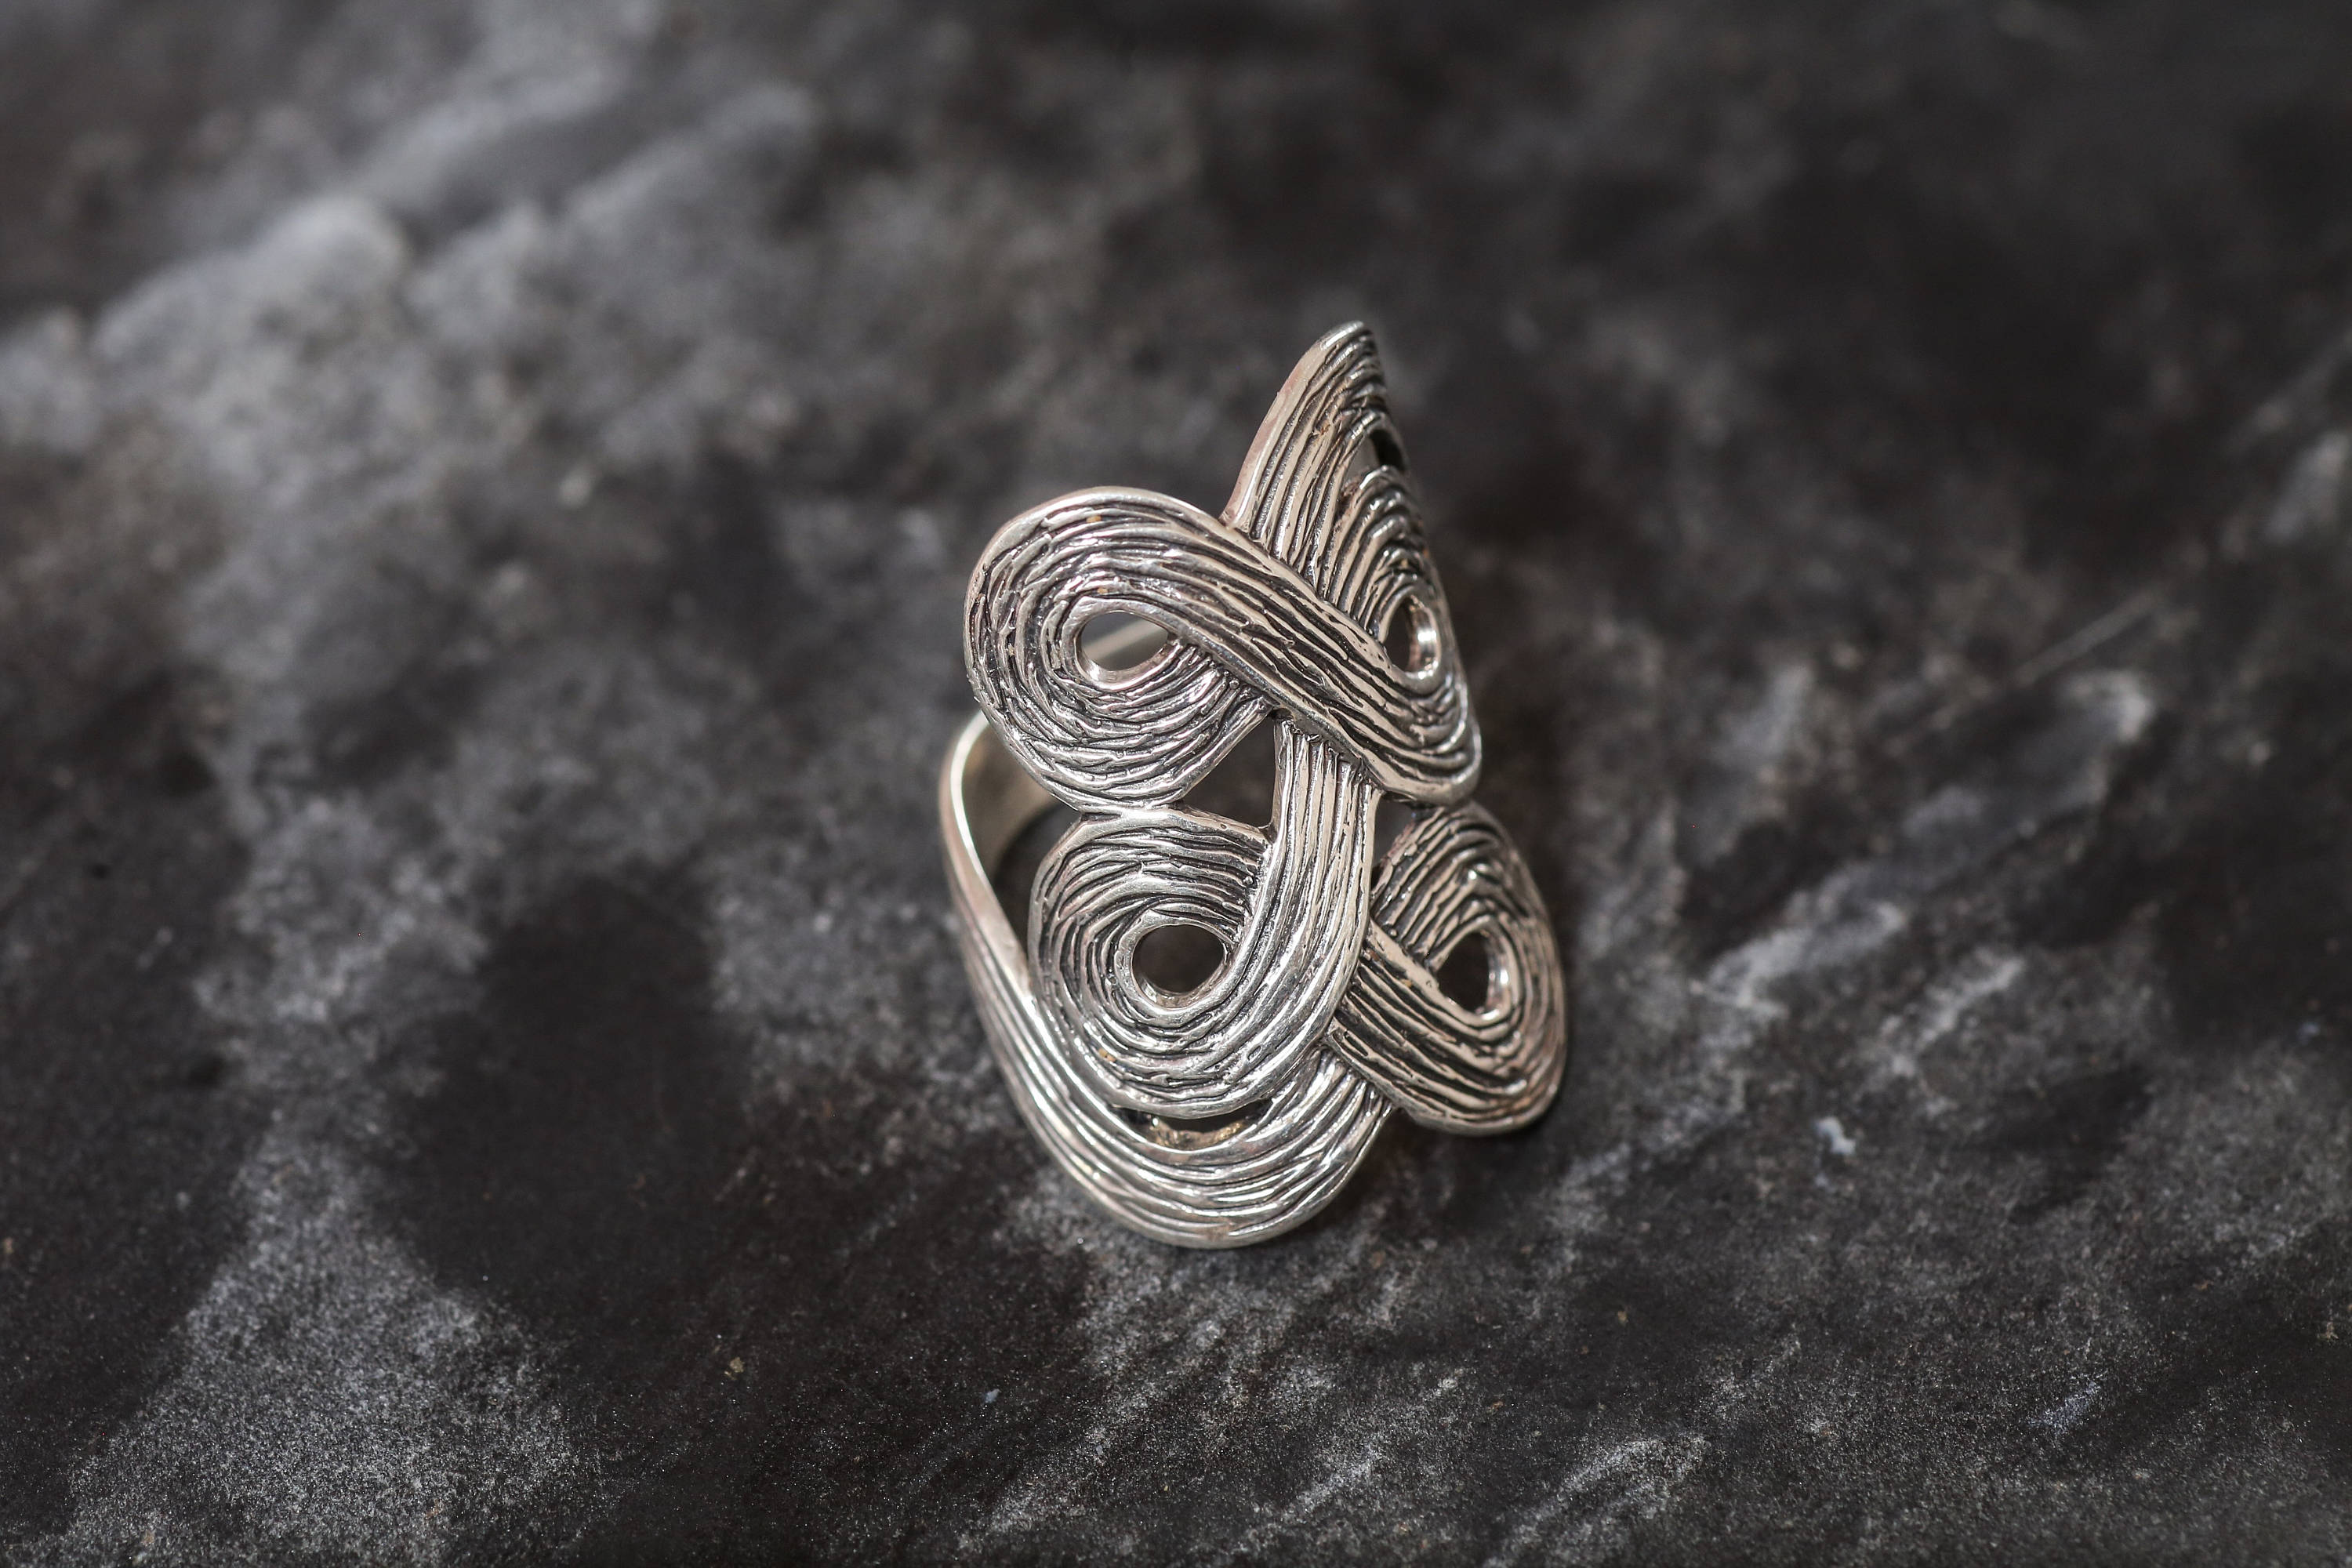 Silver Designer Ring, Infinity Ring, Solid Silver Ring, Statement Ring, Unique Silver Ring, Infinite Ring, Art Ring, Sterling Silver Ring